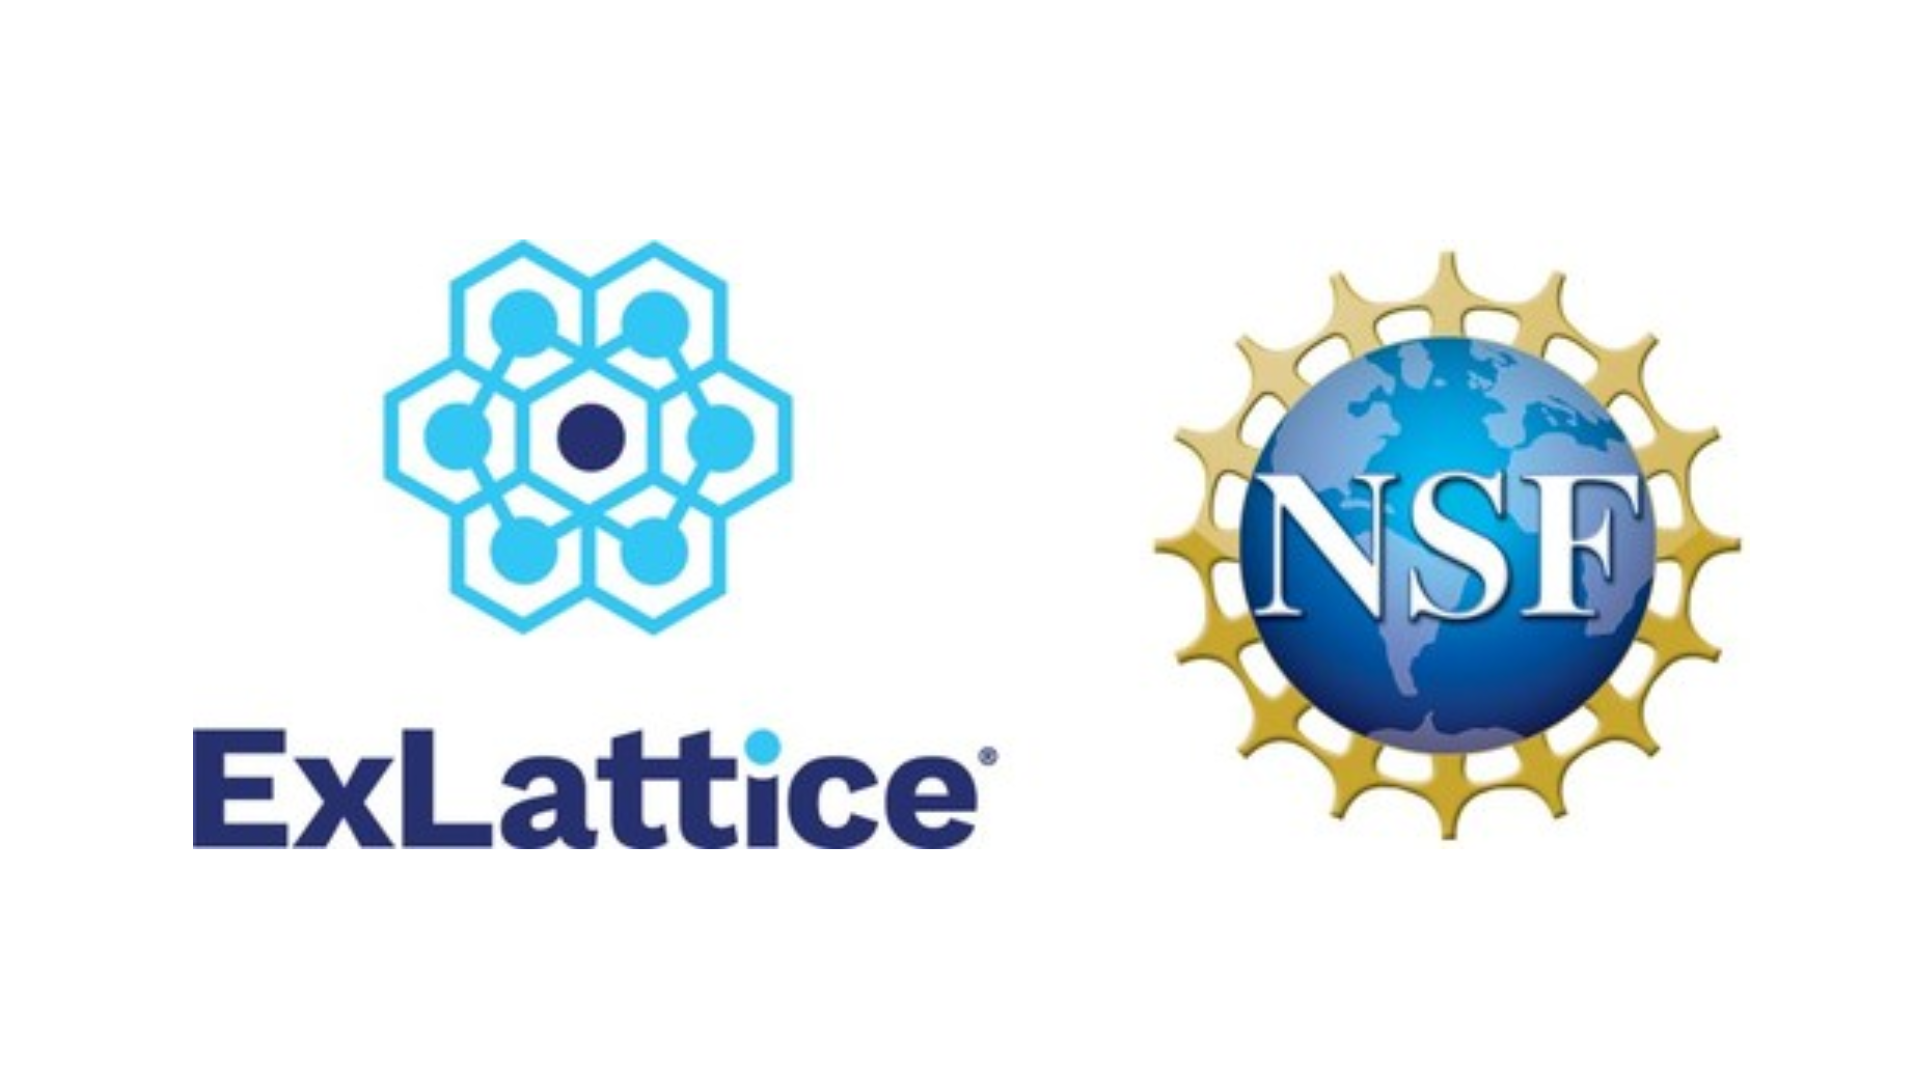 ExLattice, Inc announced receiving a Phase I award from the NSF SBIR Program for developing its accelerated simulation engine for additive manufacturing.